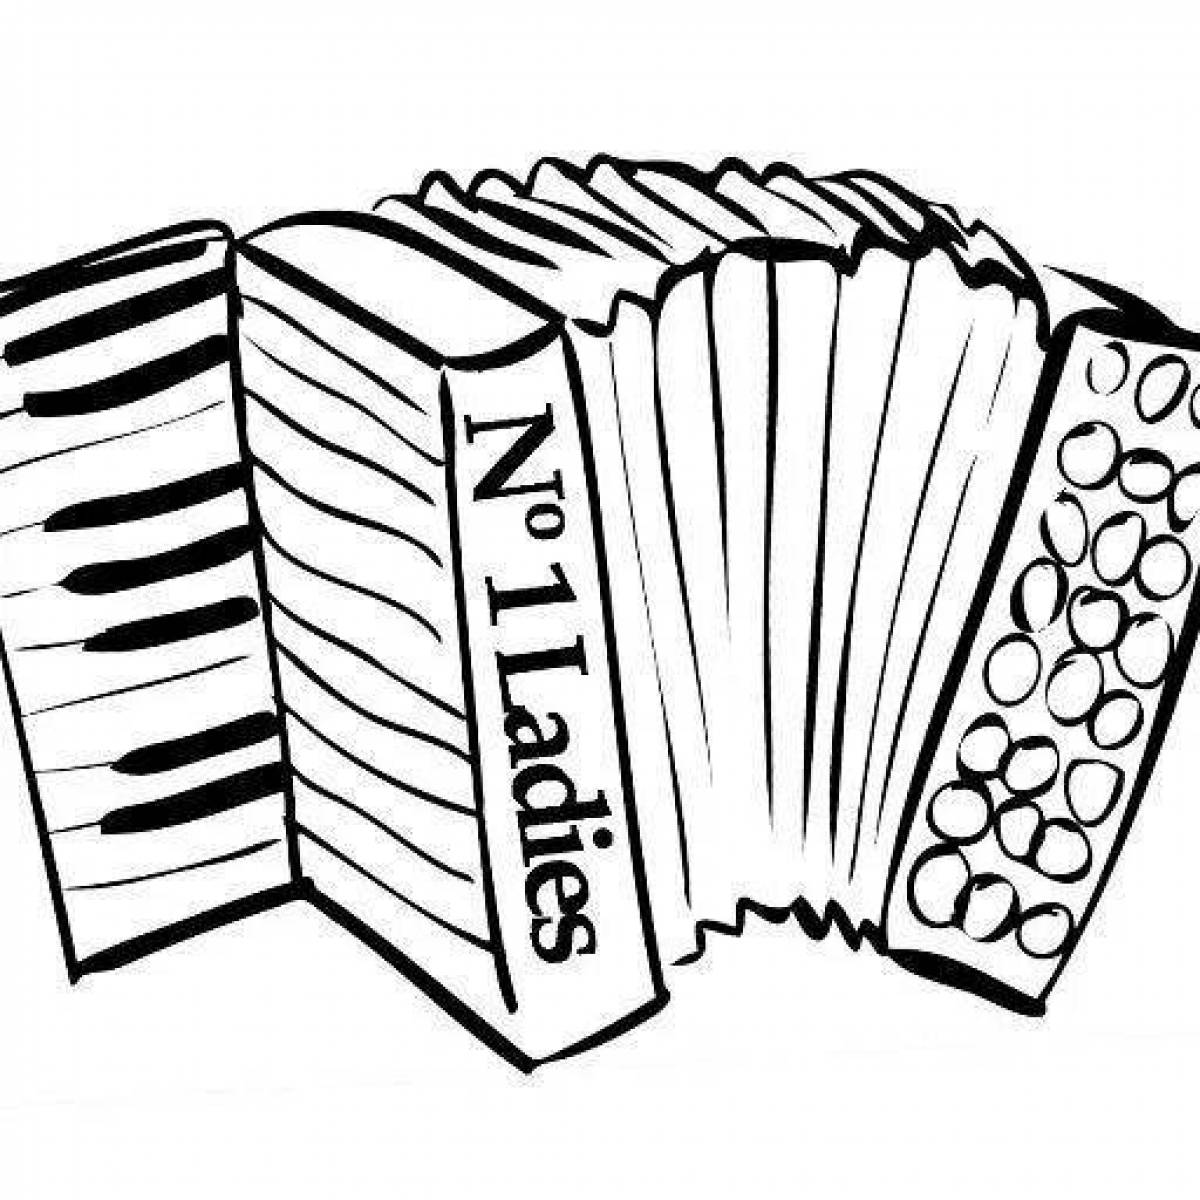 Exciting harmonica coloring book